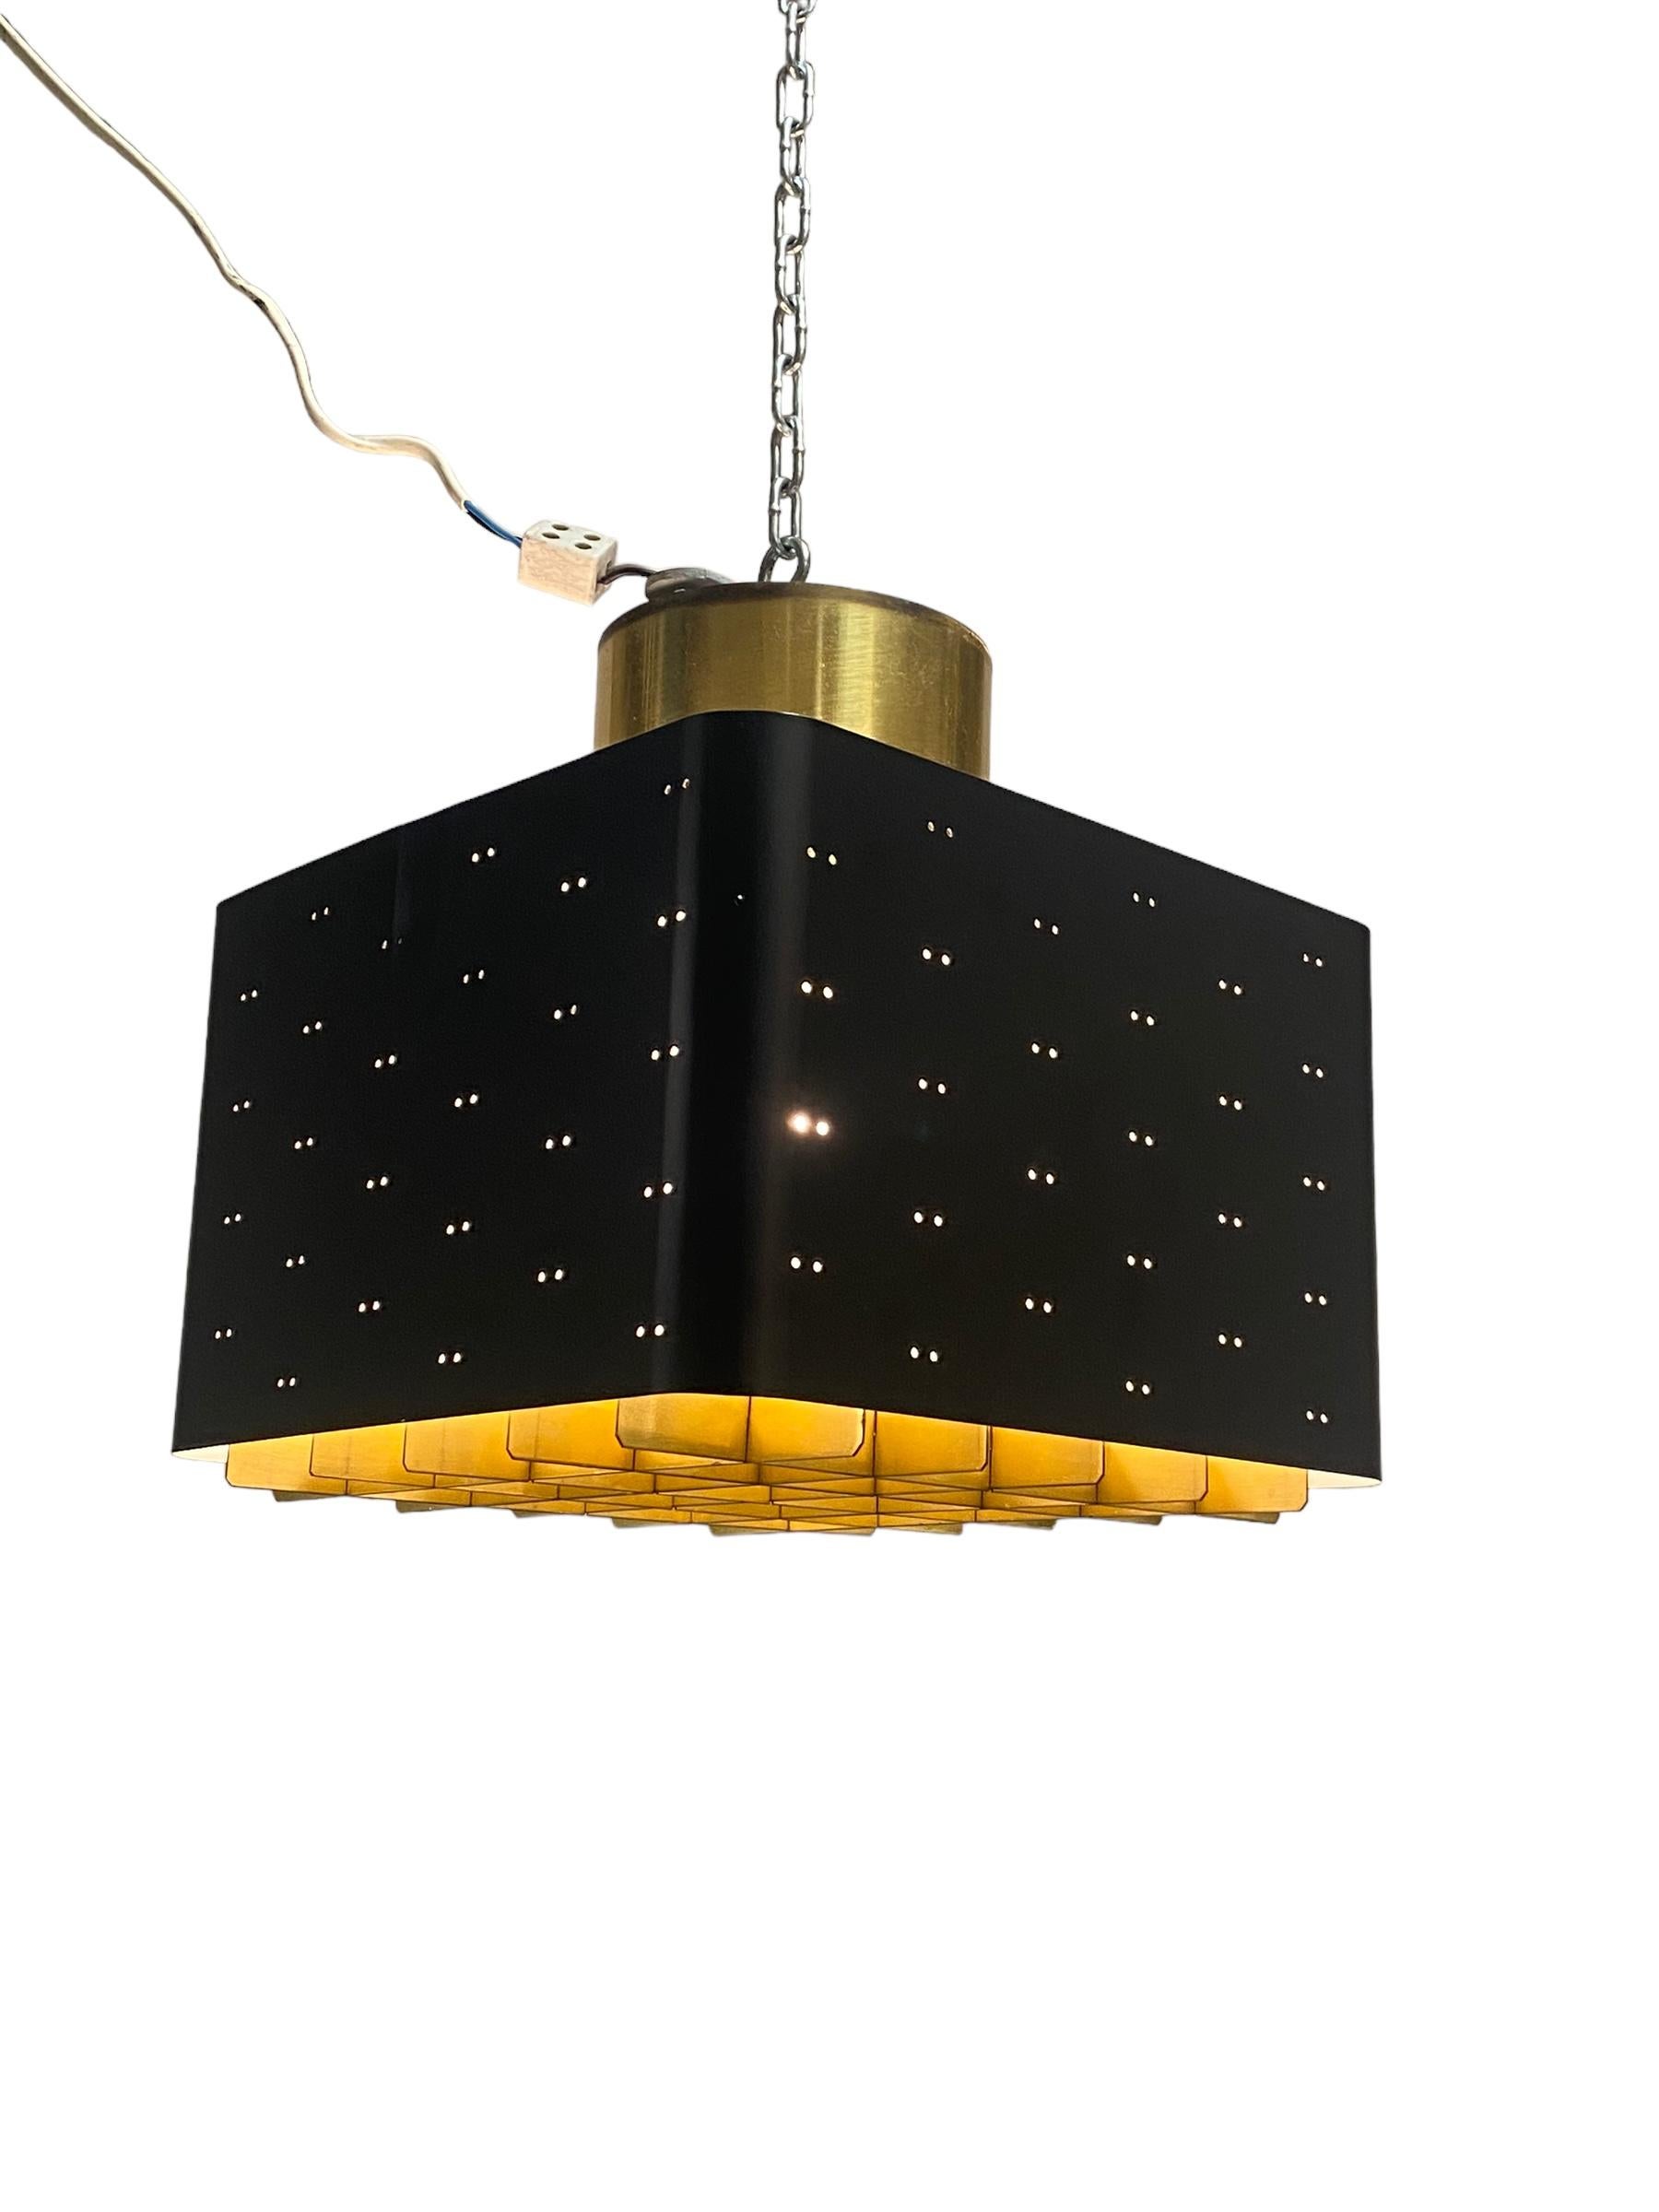 The Starry Sky is one of the most iconic designs of Paavo Tynell`s lamps. It was made by both Taito and Idman in a few different sizes. The way the light filters through the grill and the holes on the sides makes the ceiling look like a starry sky.